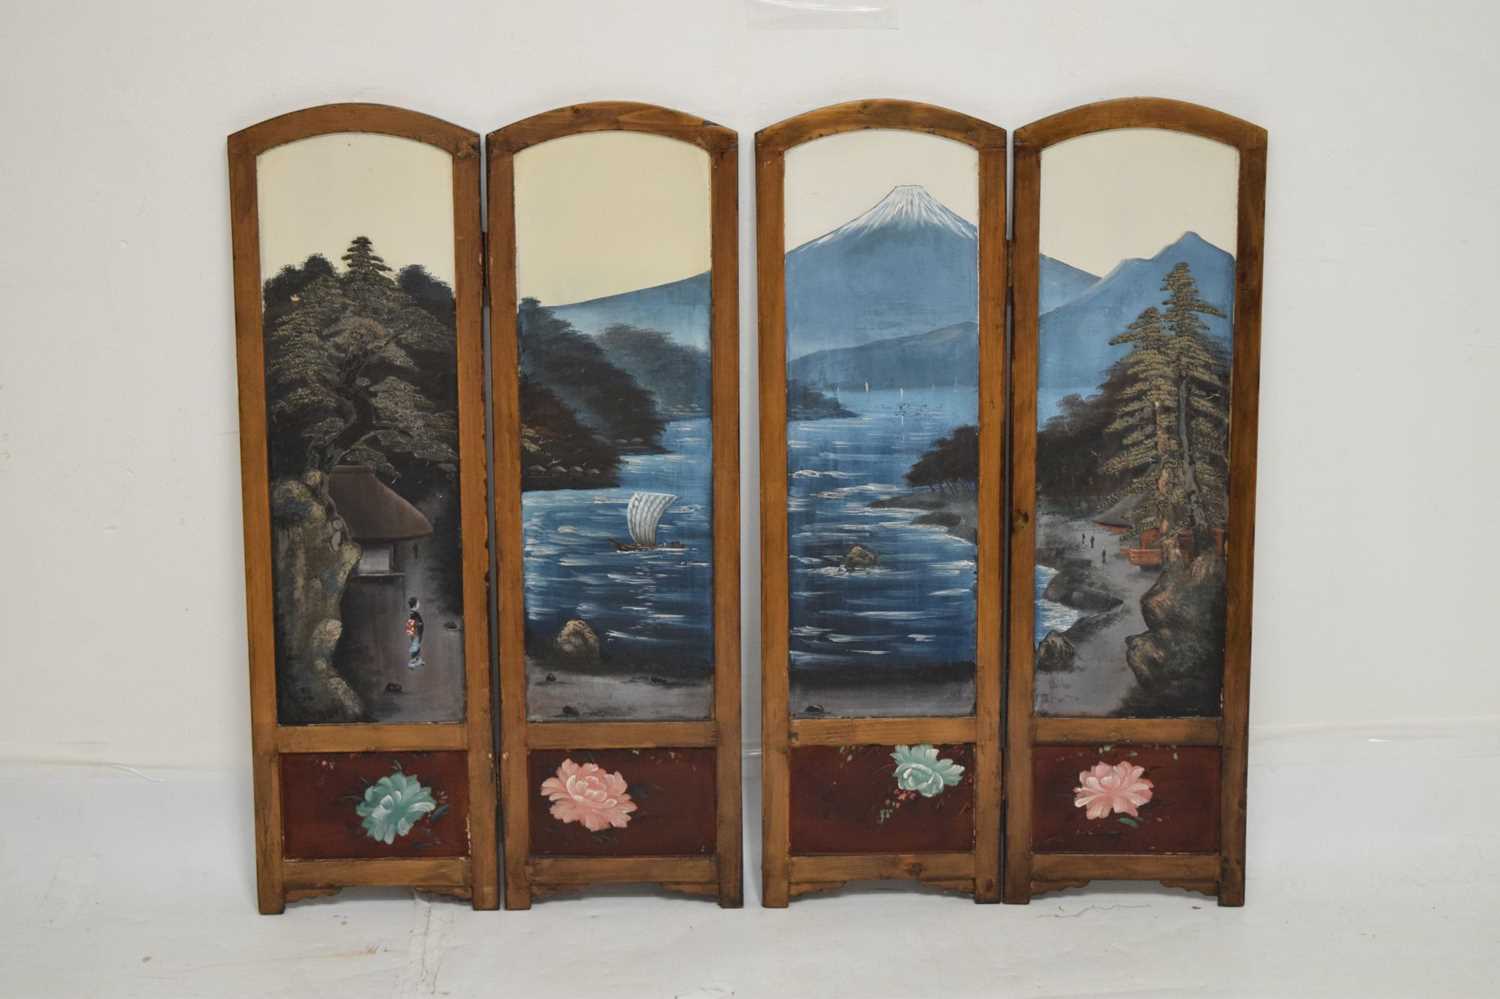 Early 20th century Japanese folding table screen with view of Mount Fuji - Image 12 of 33